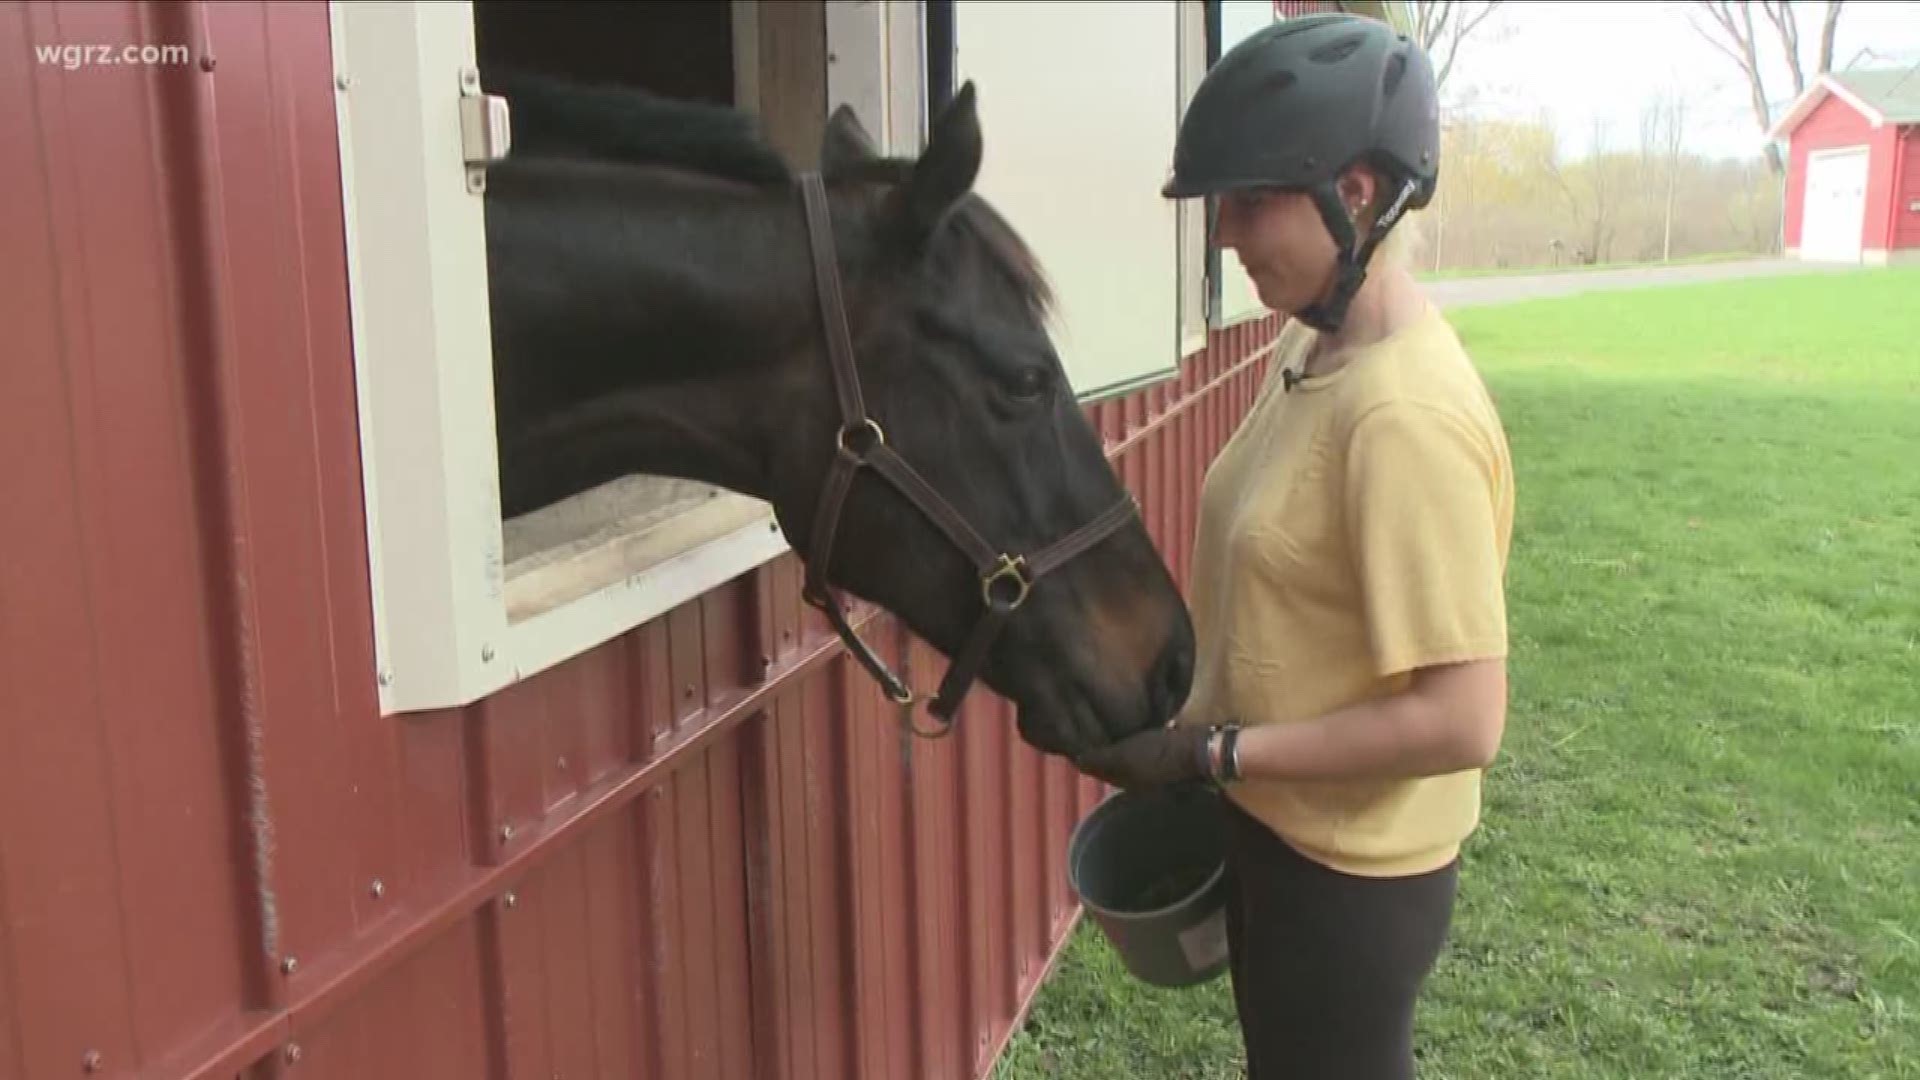 Claire Taberski will compete in a 600 mile horse race in Mongolia.